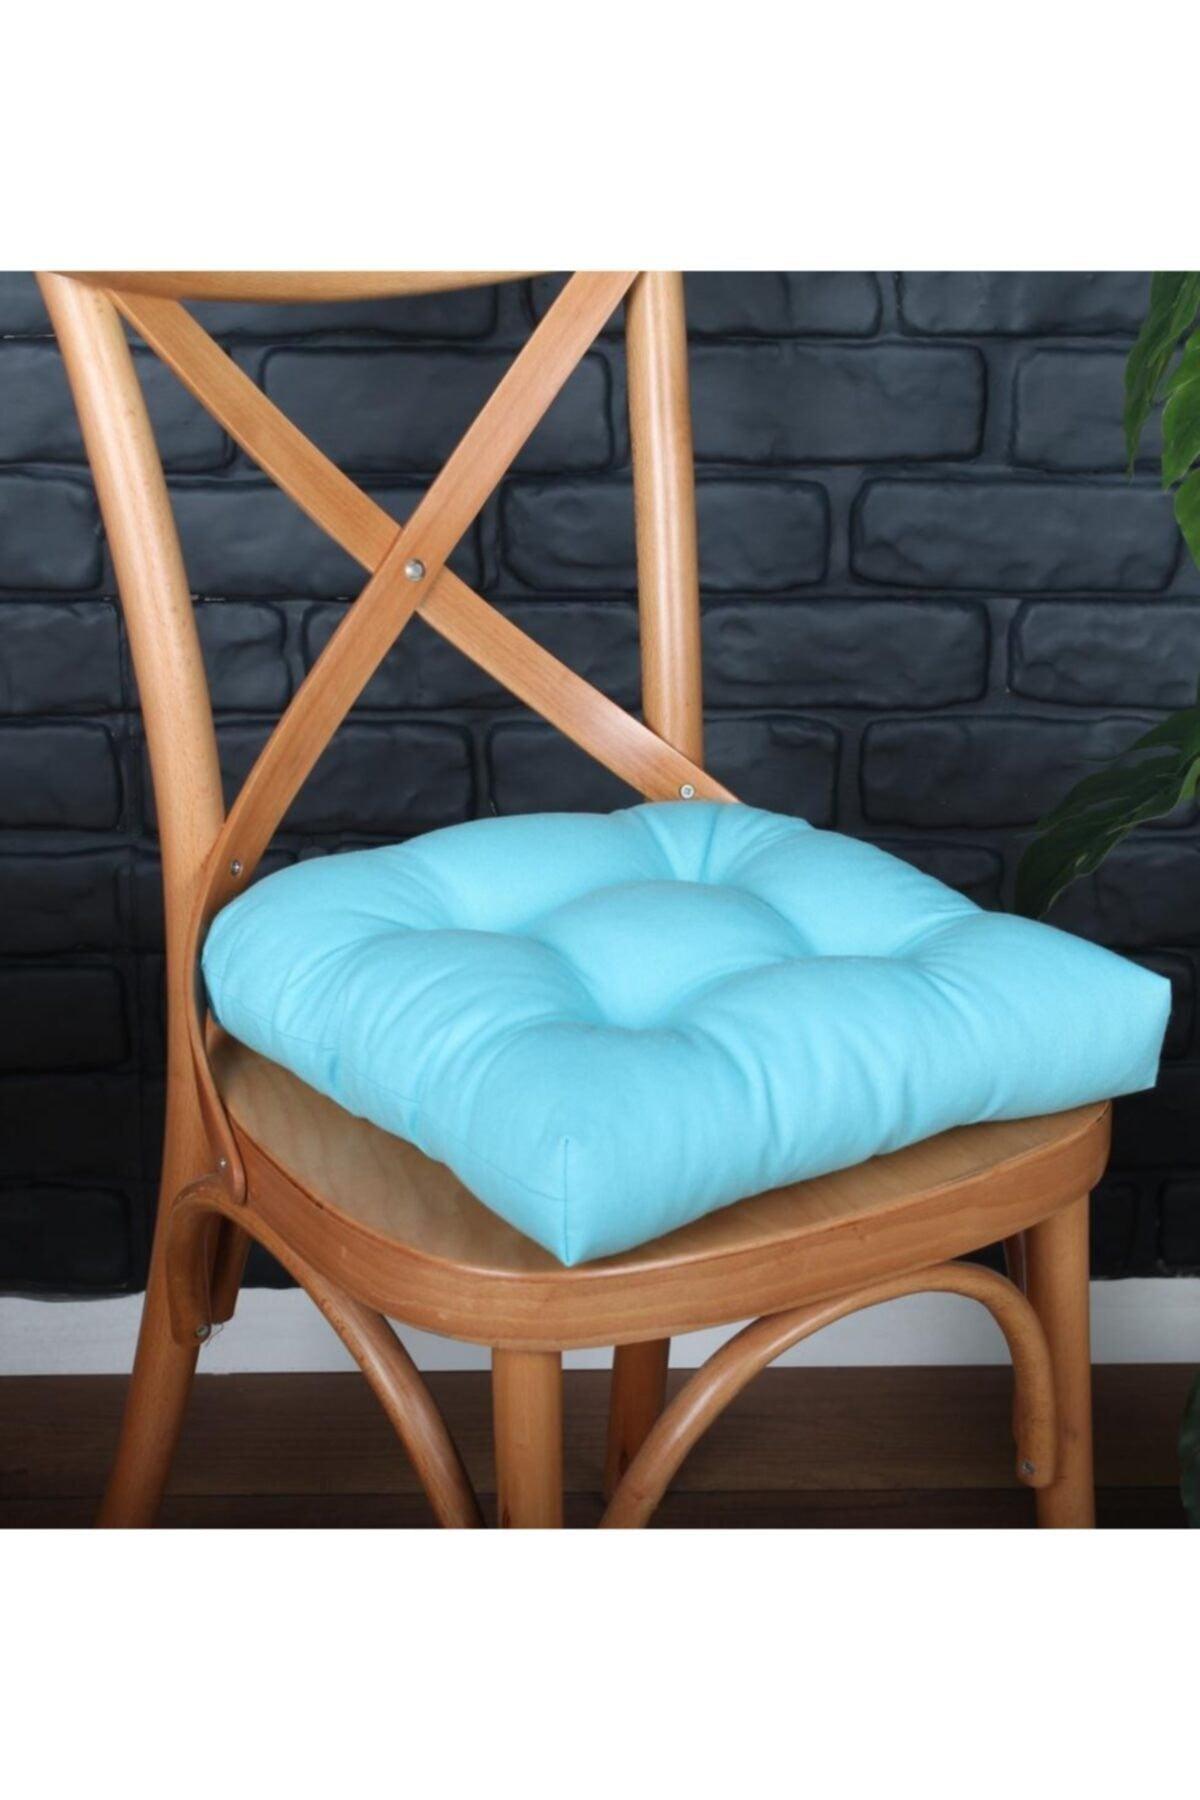 Lux Pofidik Turquoise Chair Cushion Specially Stitched Laced 40x40cm - Swordslife